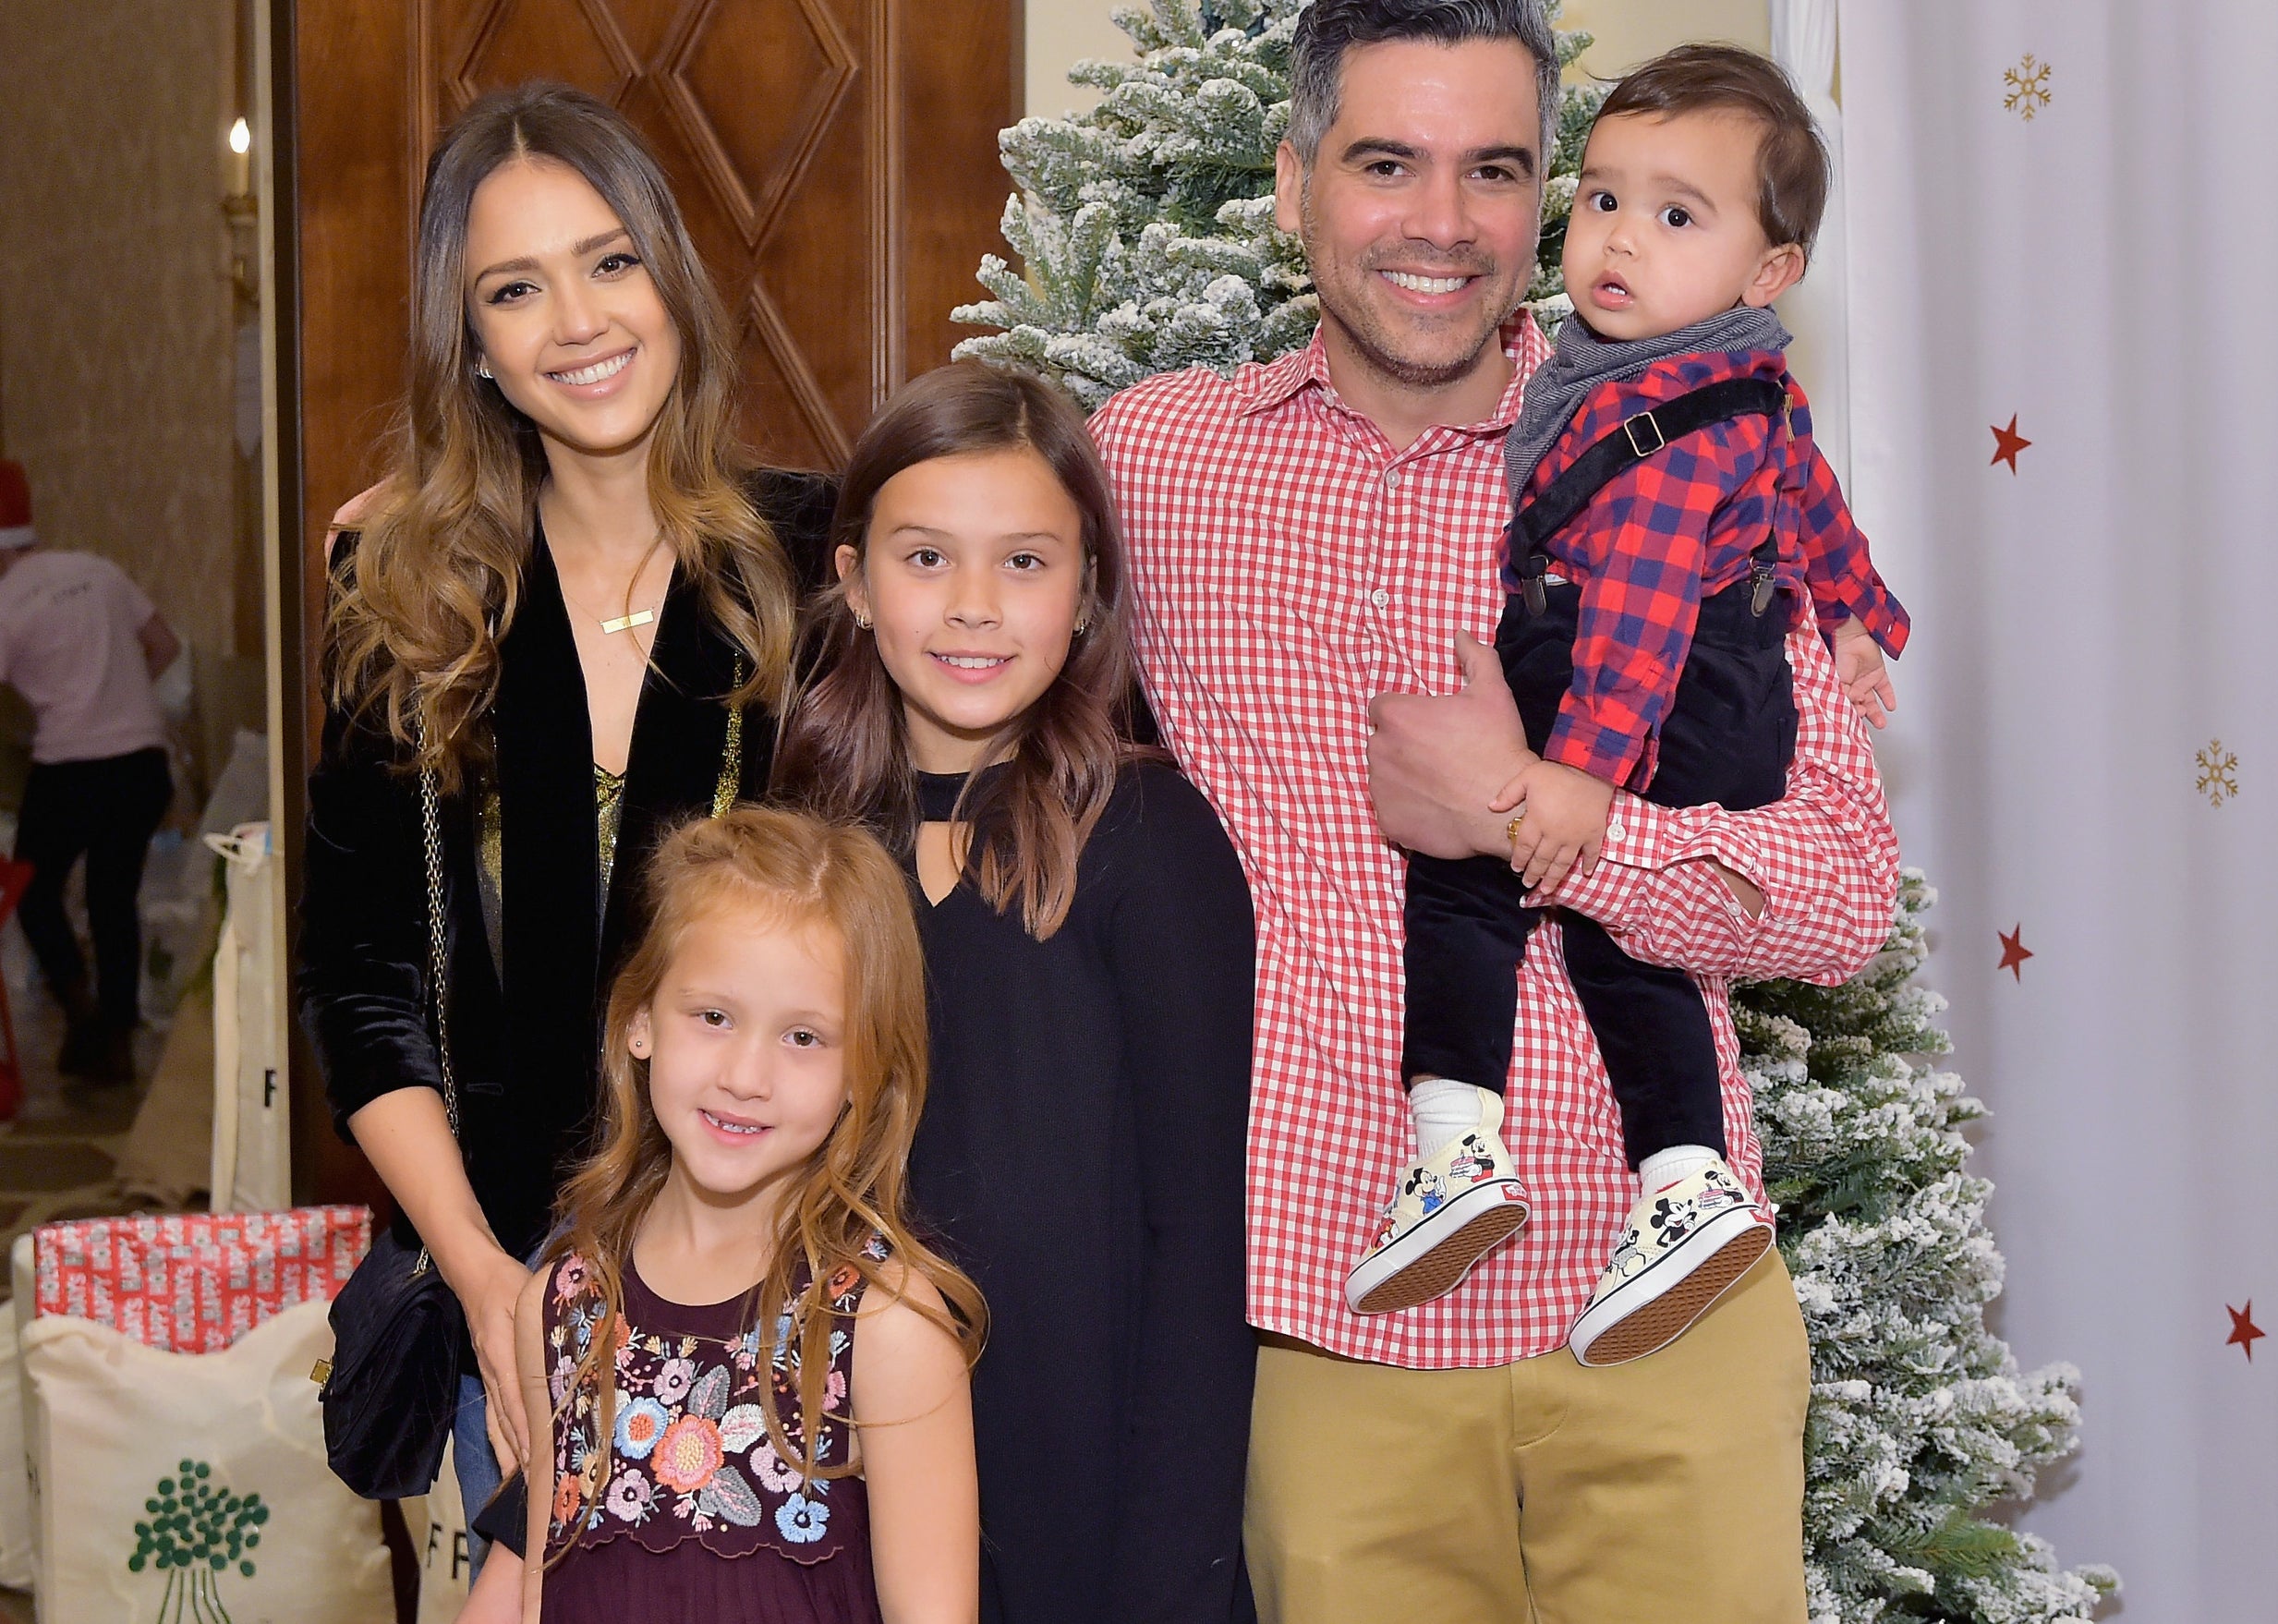 Jessica poses with her husband and three children